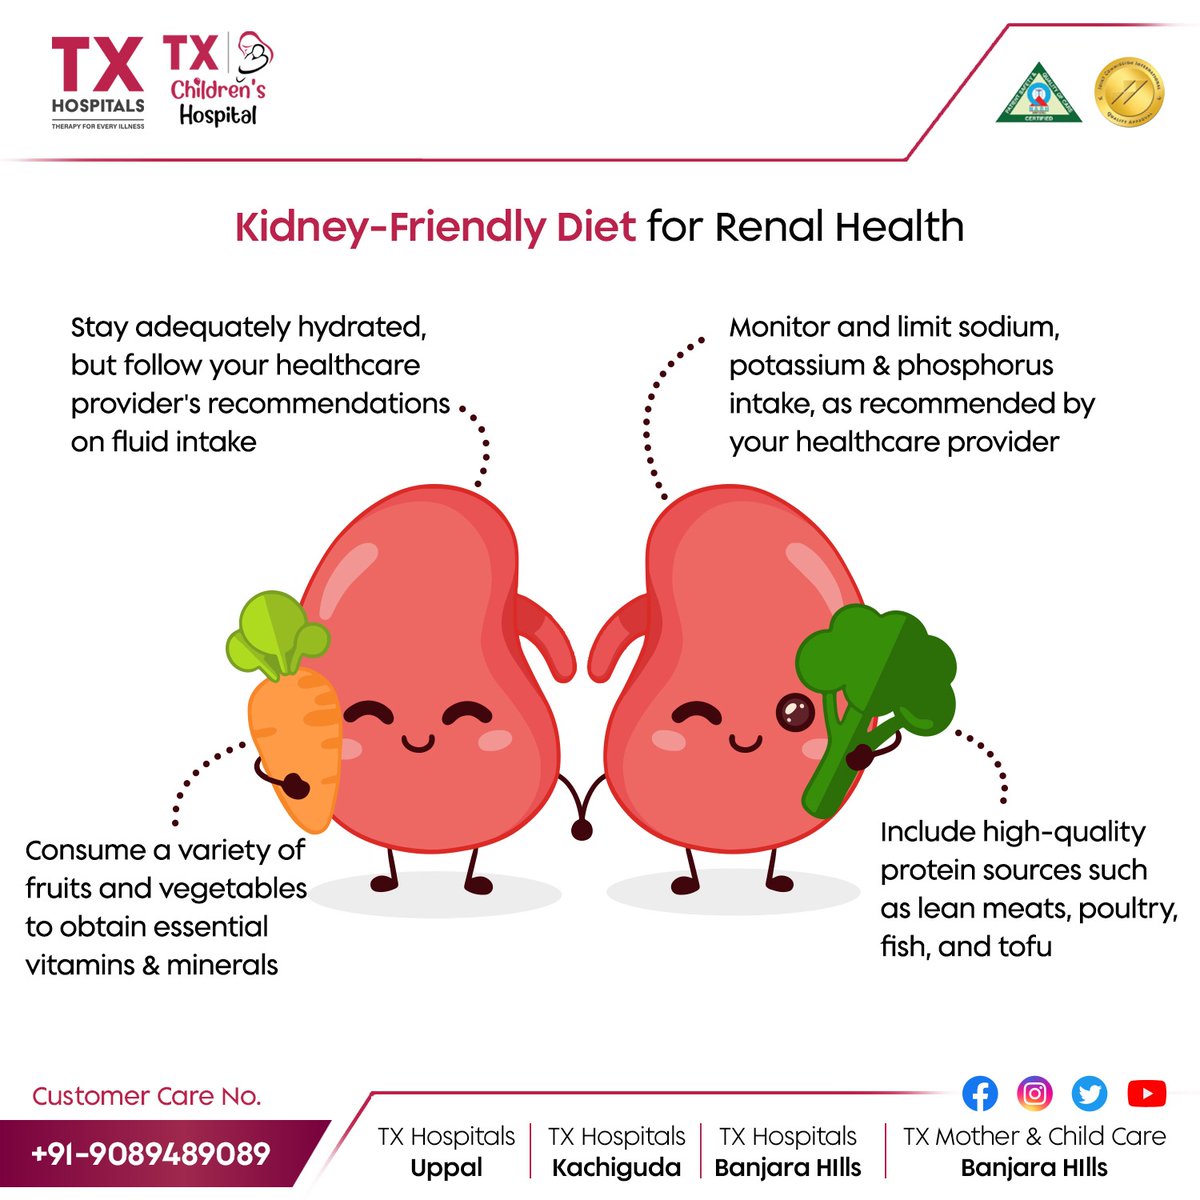 🌟 Prioritizing your kidney health is a must! 🌟

Discover essential tips for a kidney-friendly diet to keep those vital organs in top shape. 💪💧

#KidneyHealth #RenalDiet #kidneycare #healthcare #TXHospitals #healthtipsdaily